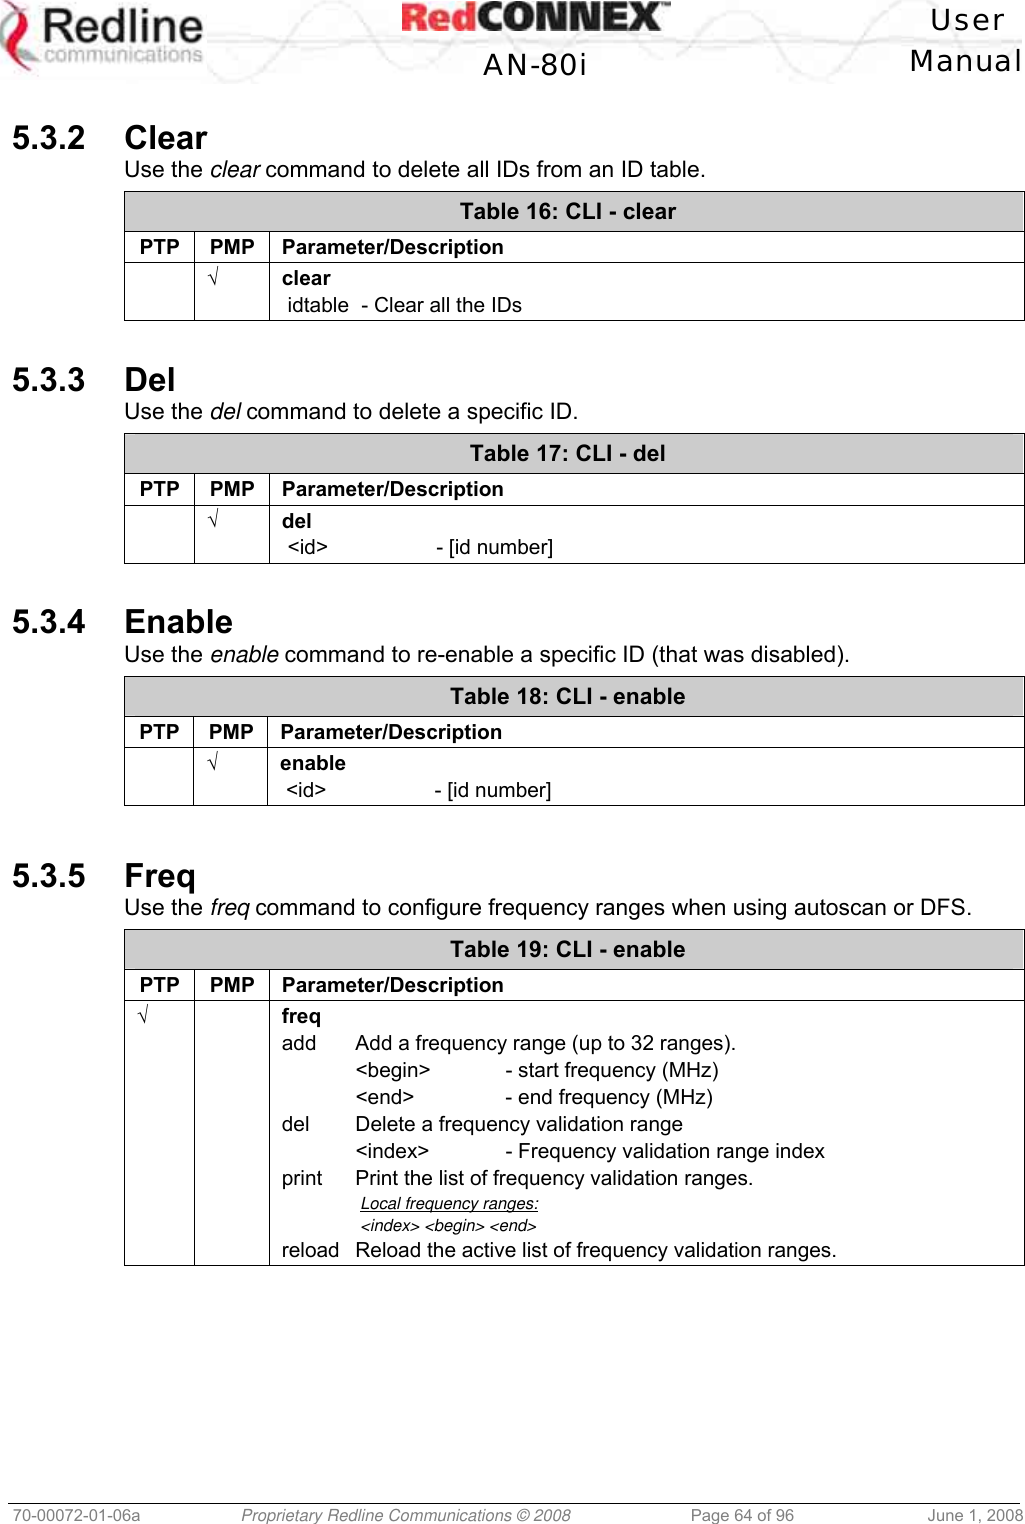   User  AN-80i Manual  70-00072-01-06a  Proprietary Redline Communications © 2008  Page 64 of 96  June 1, 2008  5.3.2 Clear Use the clear command to delete all IDs from an ID table. Table 16: CLI - clear PTP PMP Parameter/Description  √ clear  idtable  - Clear all the IDs  5.3.3 Del Use the del command to delete a specific ID. Table 17: CLI - del PTP PMP Parameter/Description  √ del  &lt;id&gt;     - [id number]  5.3.4 Enable Use the enable command to re-enable a specific ID (that was disabled). Table 18: CLI - enable PTP PMP Parameter/Description  √ enable  &lt;id&gt;     - [id number]   5.3.5 Freq Use the freq command to configure frequency ranges when using autoscan or DFS. Table 19: CLI - enable PTP PMP Parameter/Description √   freq add  Add a frequency range (up to 32 ranges).   &lt;begin&gt;  - start frequency (MHz)   &lt;end&gt;    - end frequency (MHz) del  Delete a frequency validation range   &lt;index&gt;   - Frequency validation range index print  Print the list of frequency validation ranges.    Local frequency ranges:    &lt;index&gt; &lt;begin&gt; &lt;end&gt; reload  Reload the active list of frequency validation ranges.  